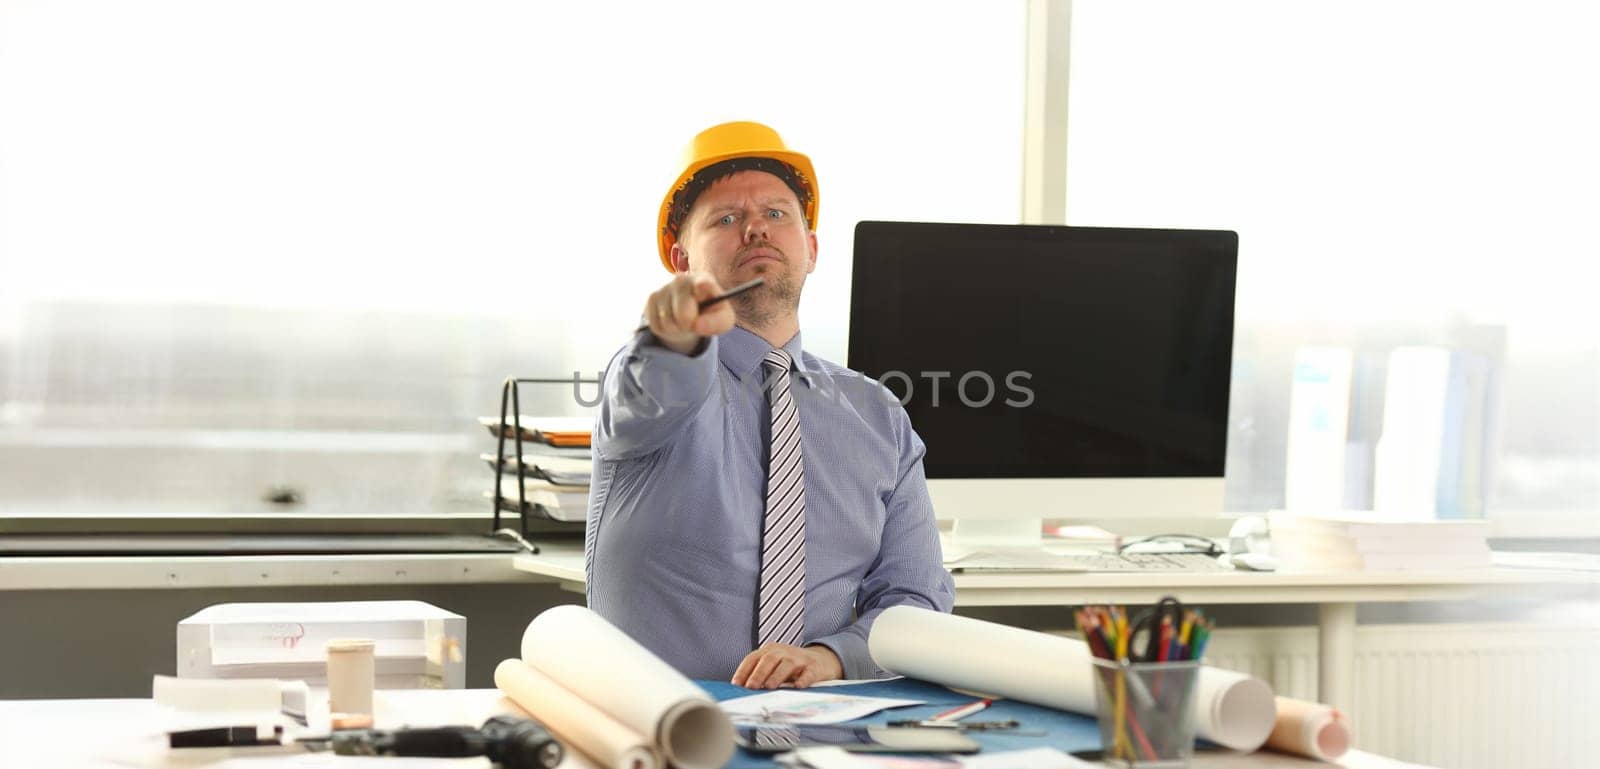 Serious Architect Working on Construction Outline. Caucasian Engineer Sitting at Office Workplace. Man Wear Formal Shirt, Tie and Yellow Helmet do House Drafting. Businessman Pointing at Camera